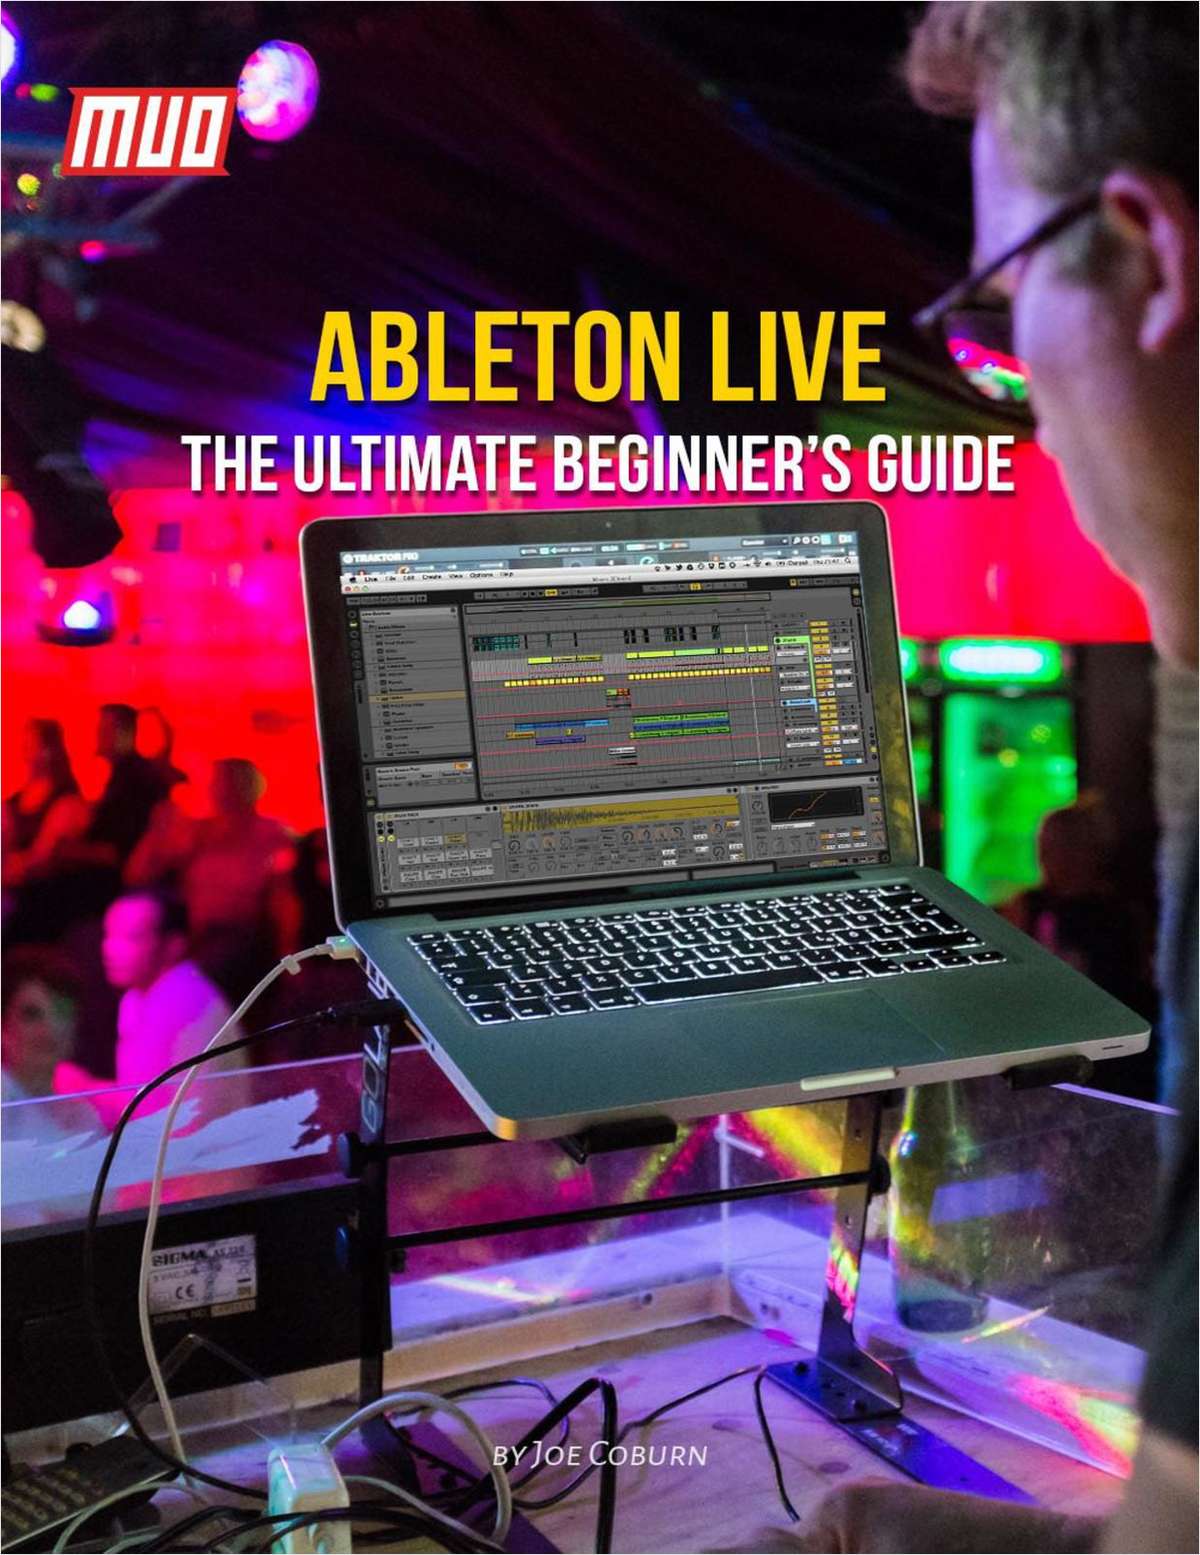 ableton live and hammerspoon